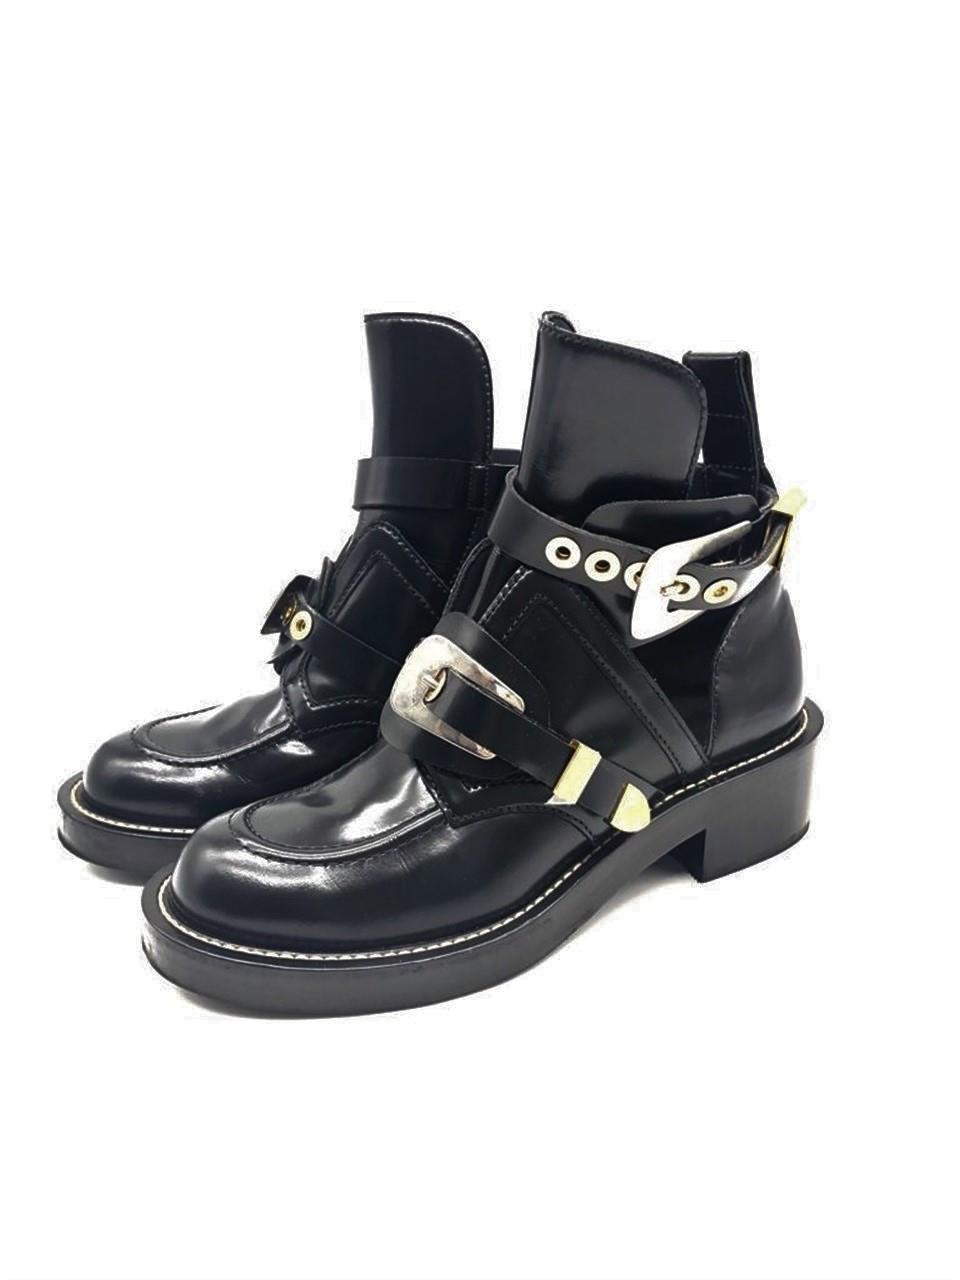 Orijinal İkinci El Balenciaga Ceinture Patent Leather Cut Out Creeper Ankle  Boots Deluxe Seconds